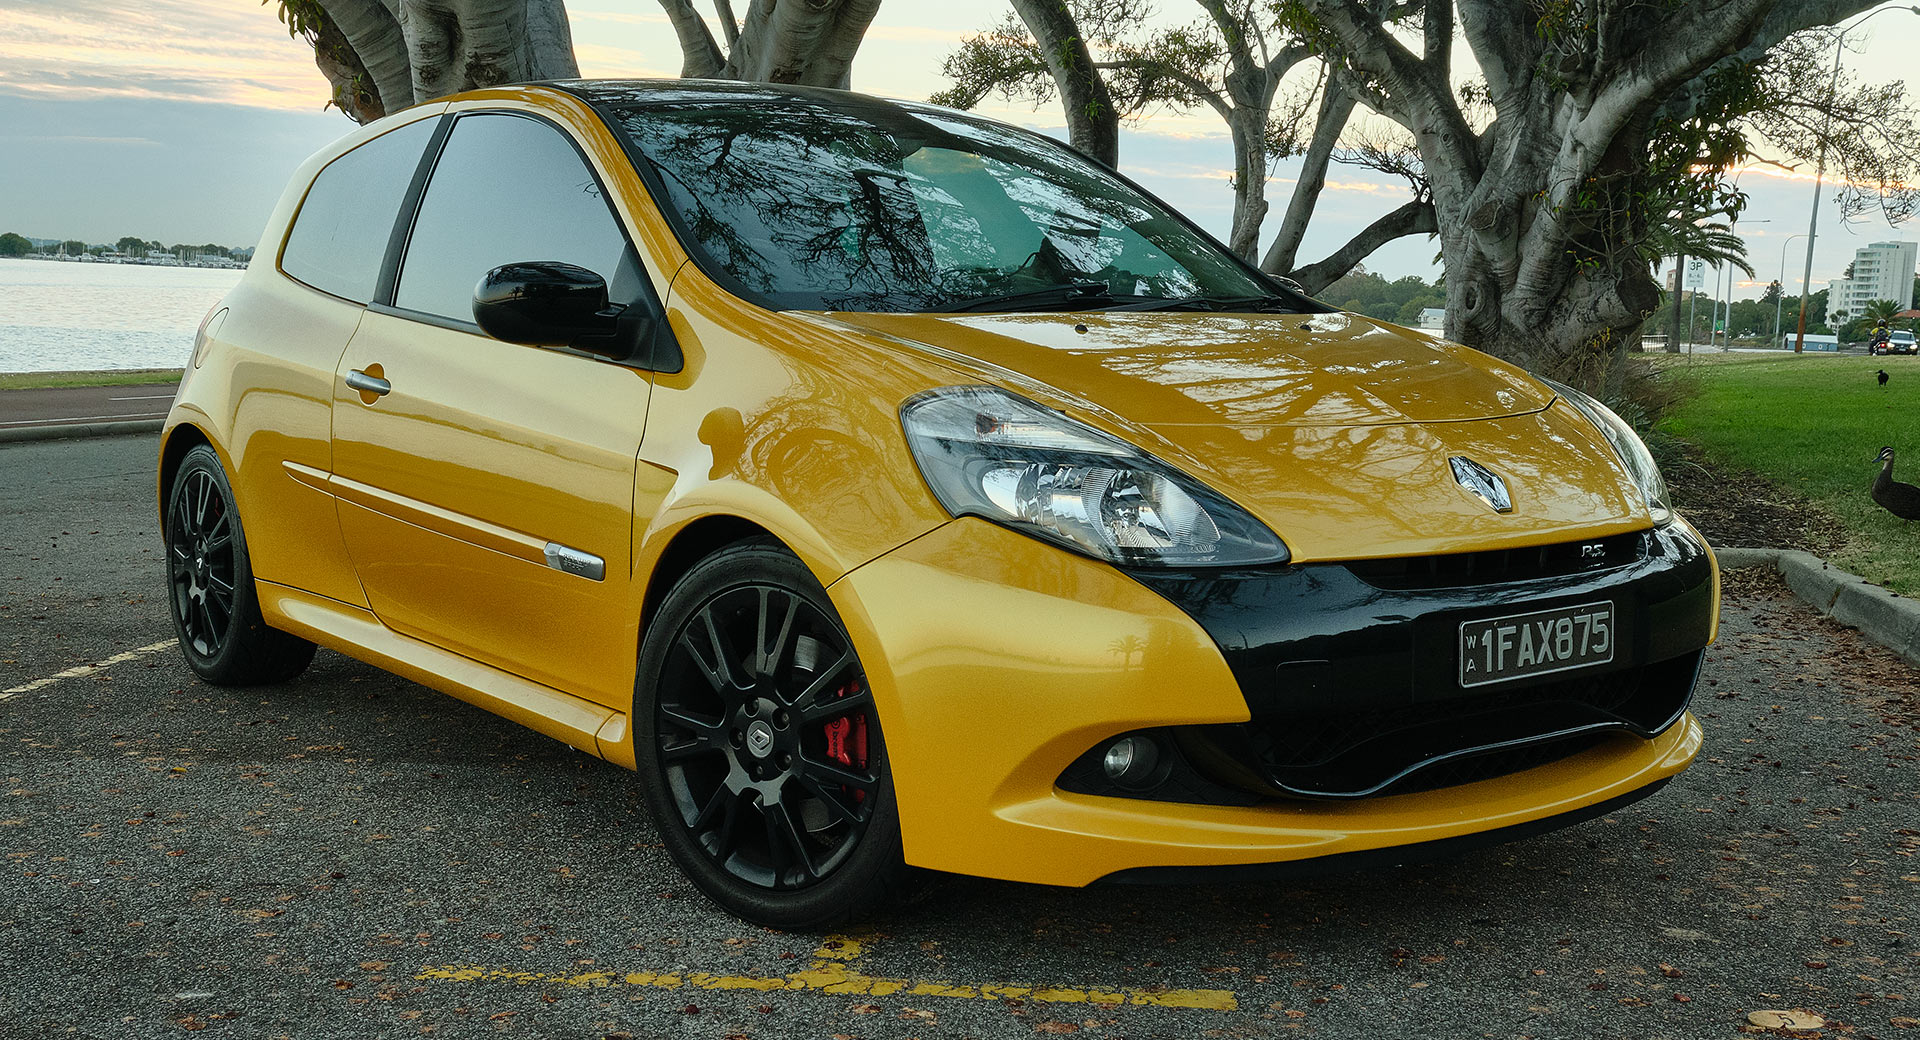 https://www.carscoops.com/wp-content/uploads/2022/01/Renault-Clio-RS200.jpg